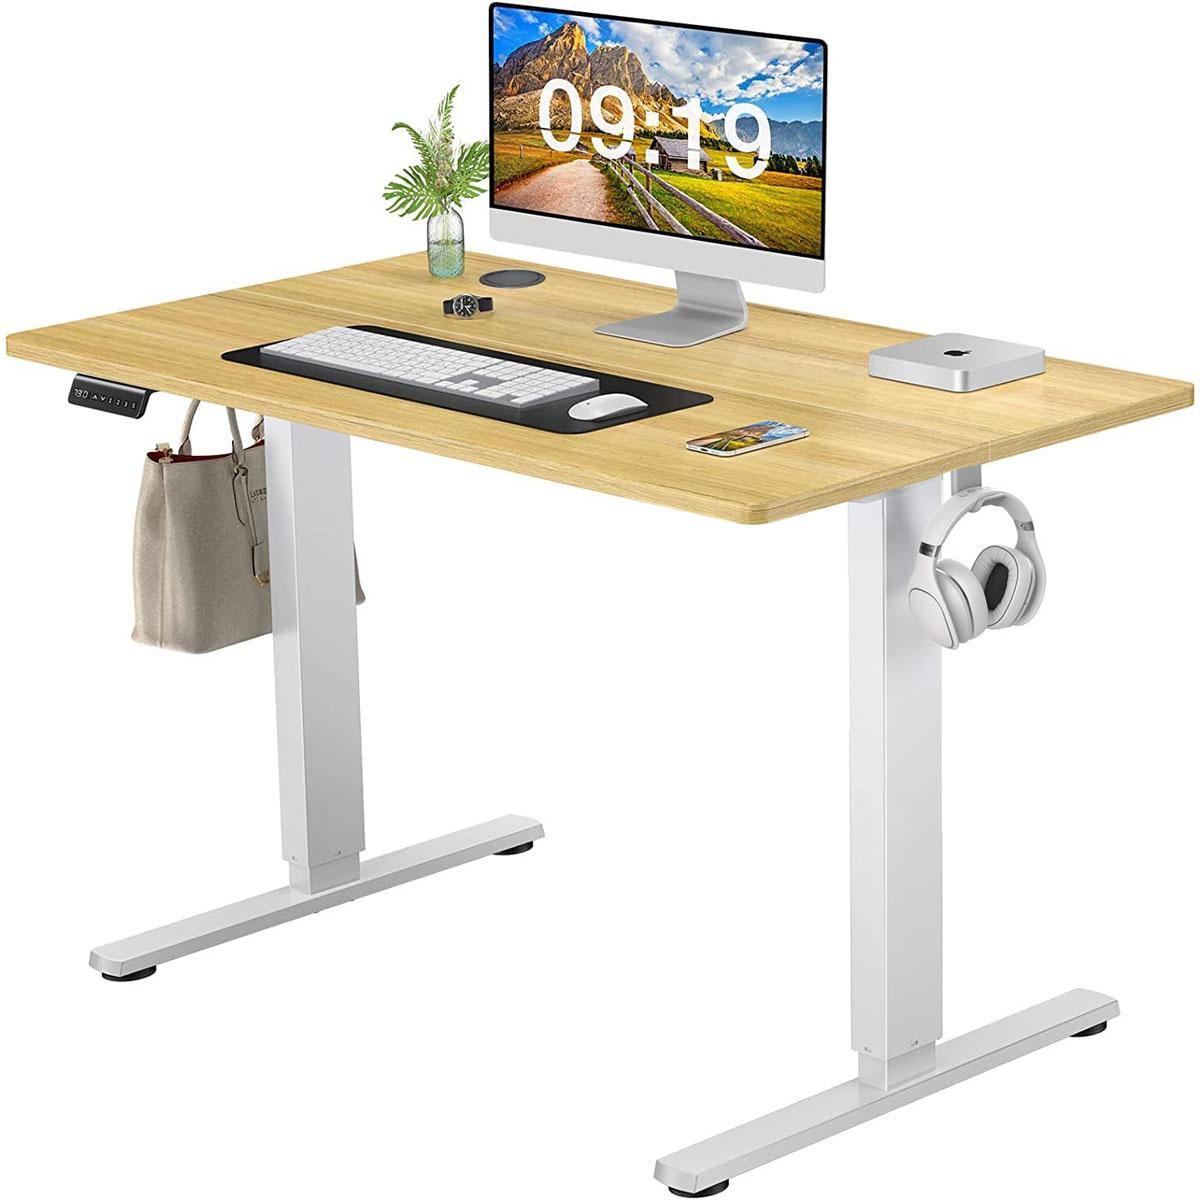 Standing Desk Adjustable Height Electric Standing Desk for $112 Shipped